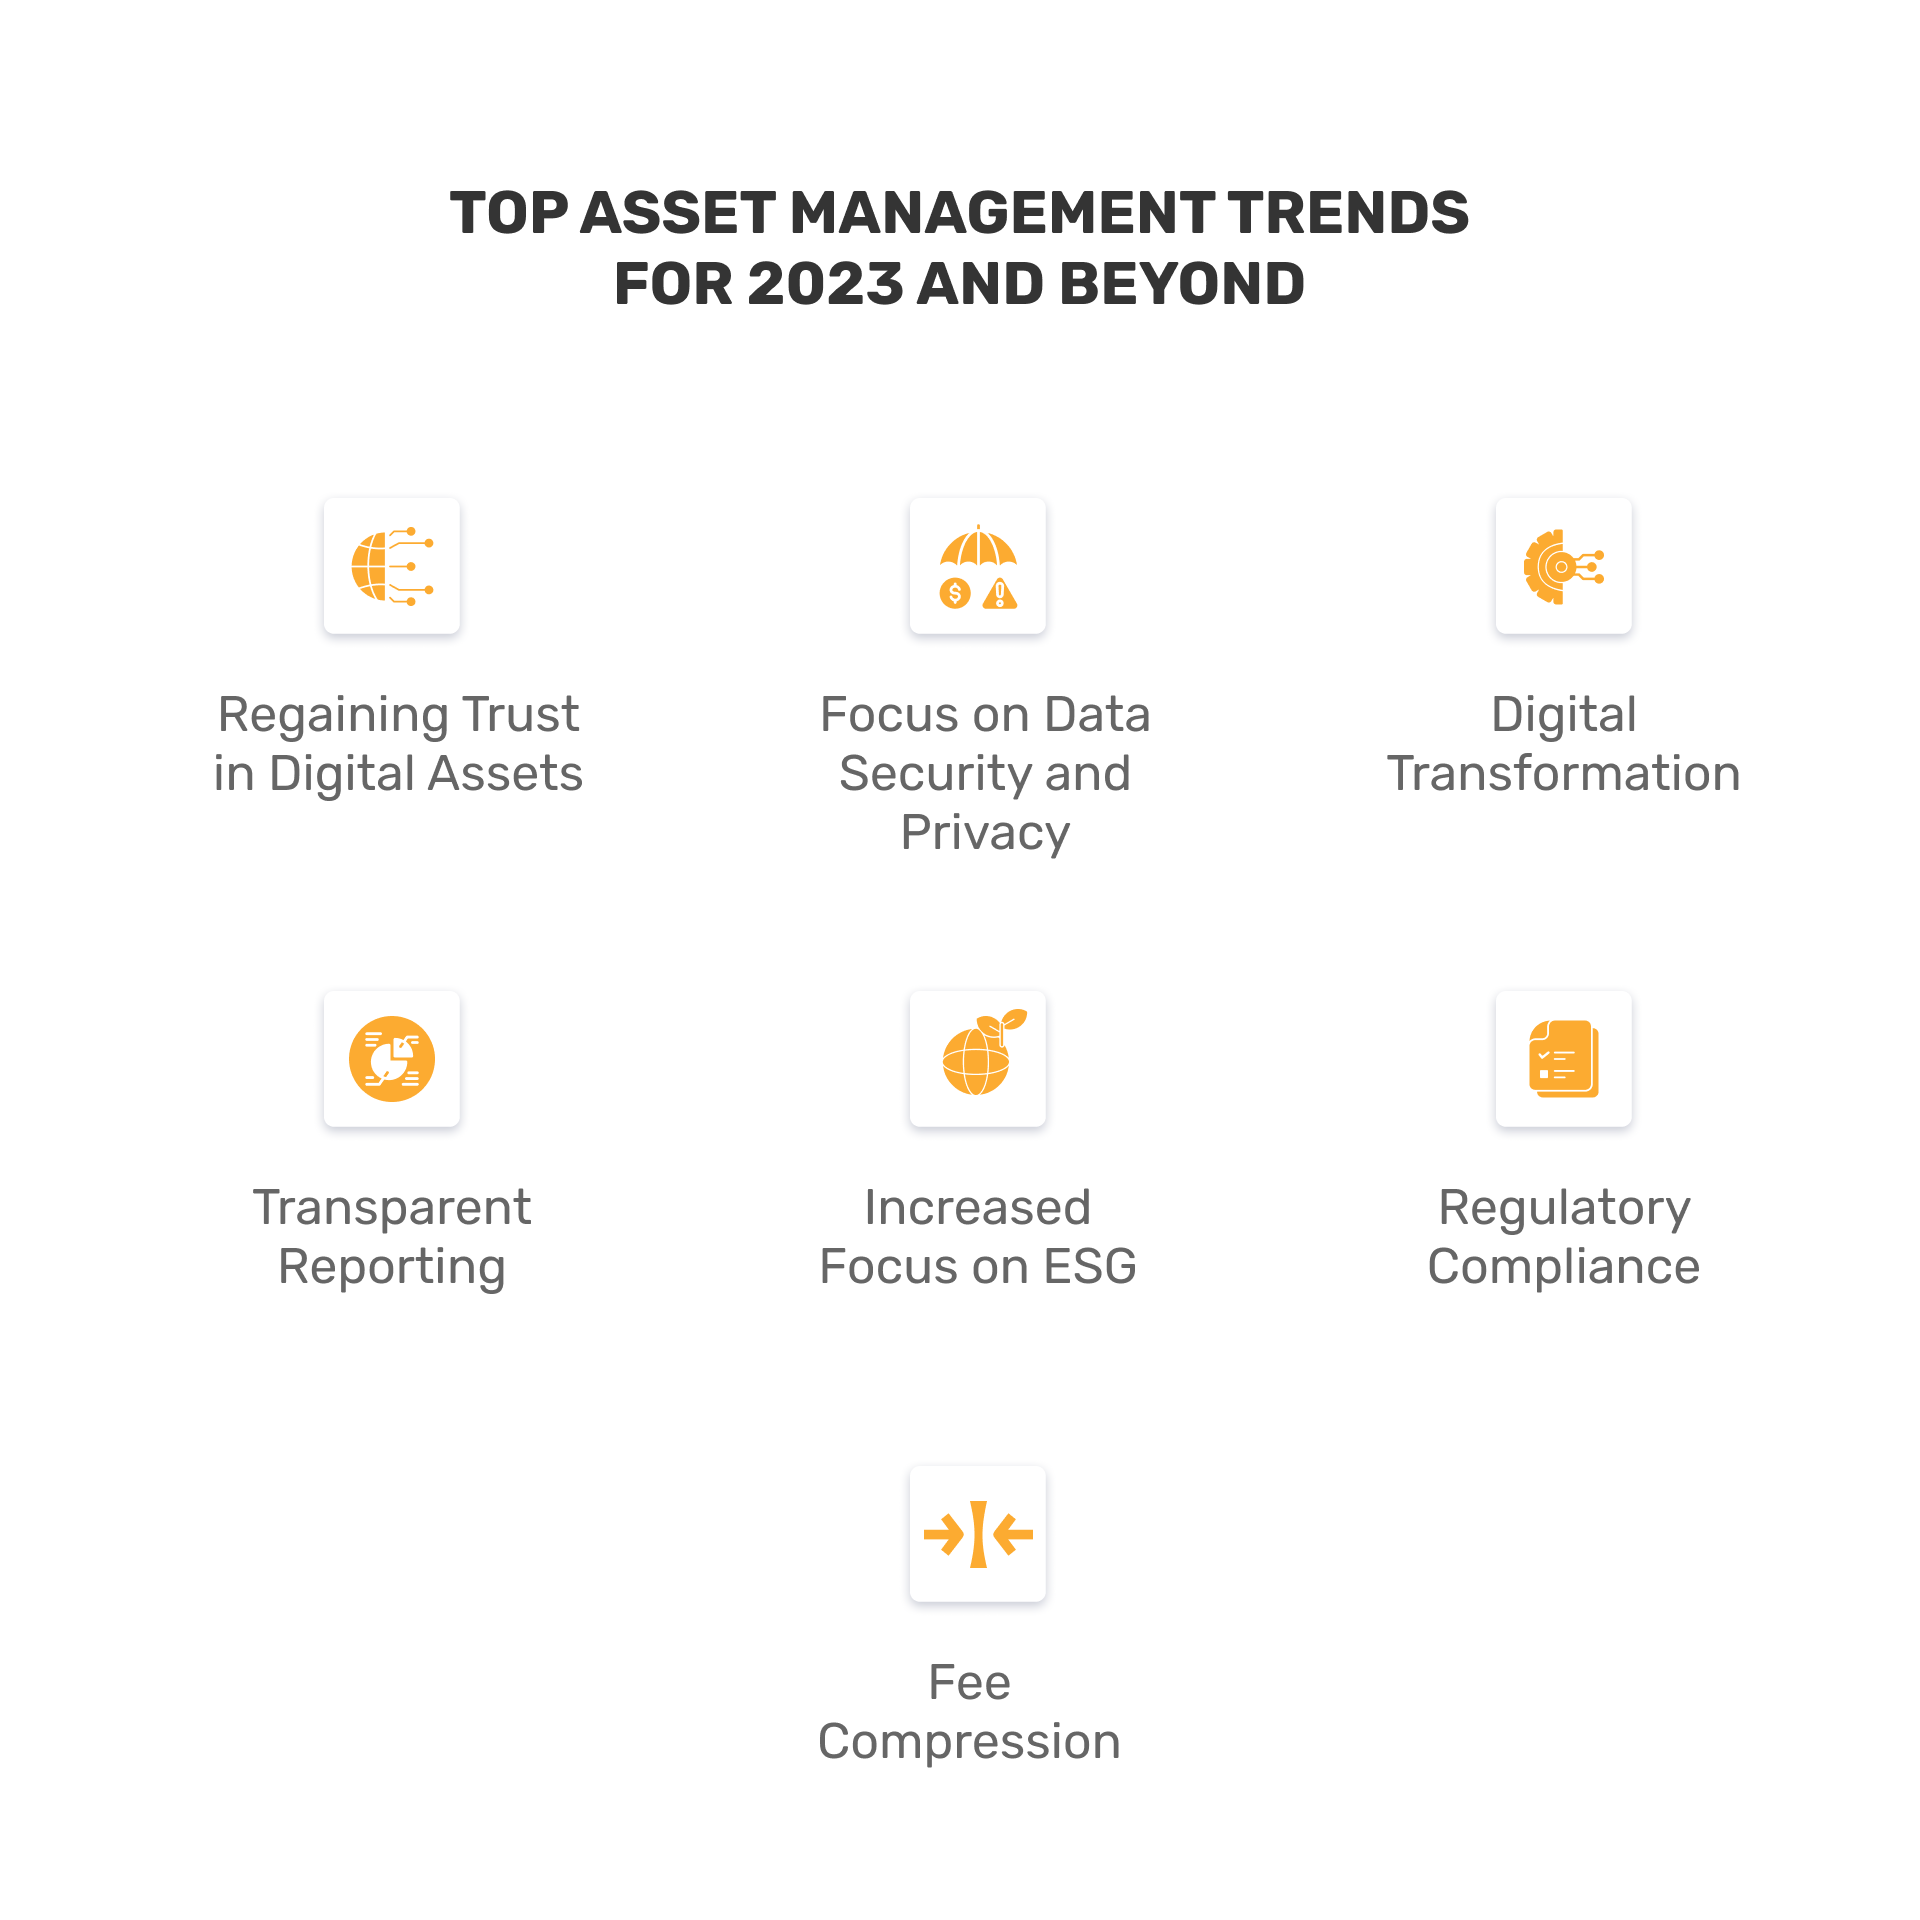 The latest trends affecting the AWM domain include digital transformation, a focus on data security and privacy, and transparent reporting.